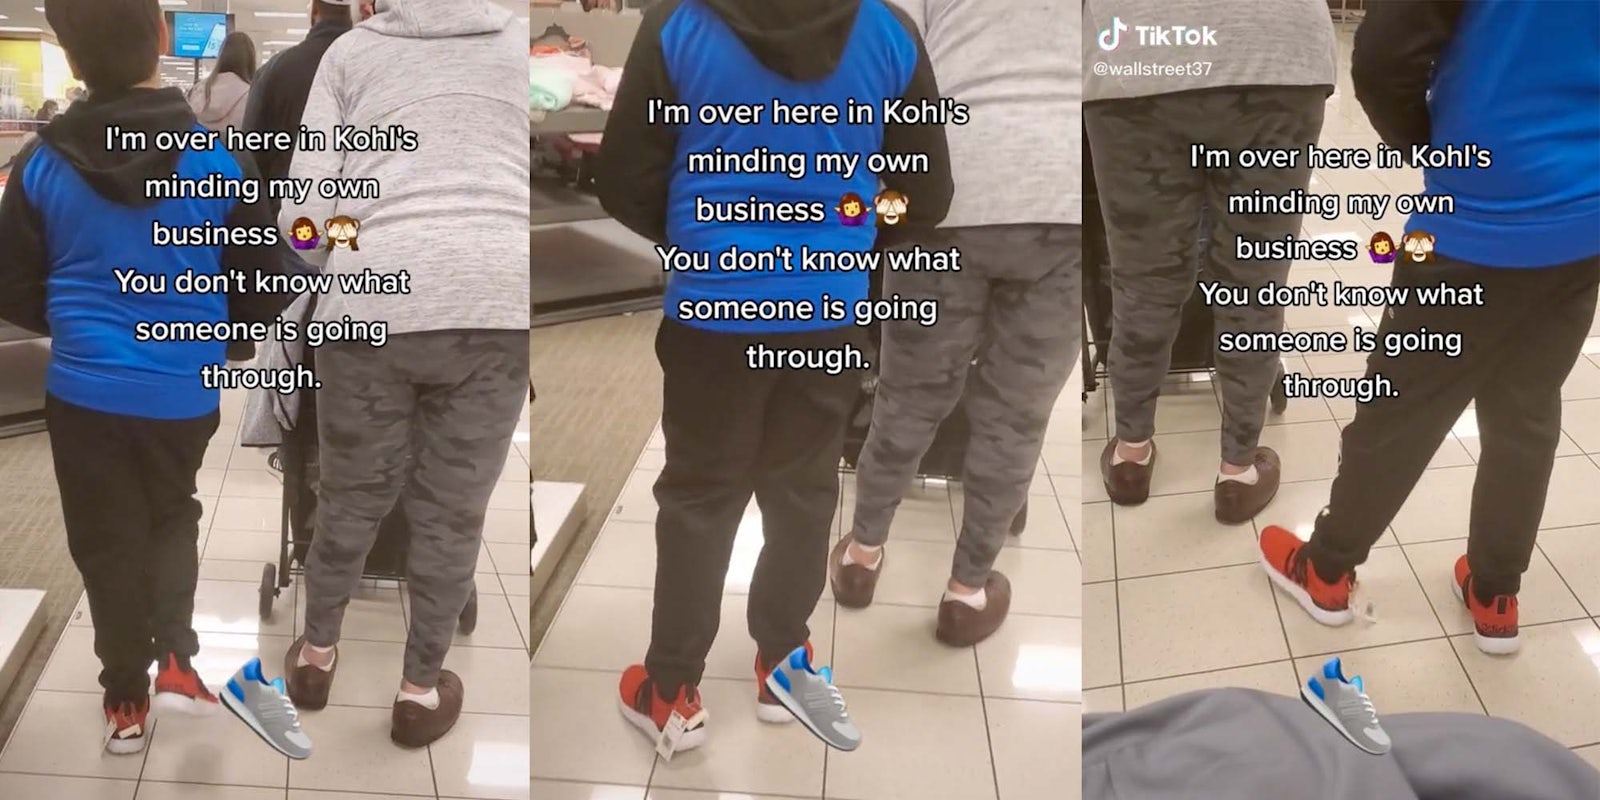 A woman takes a video in Kohl's of a child with tags on his shoes.